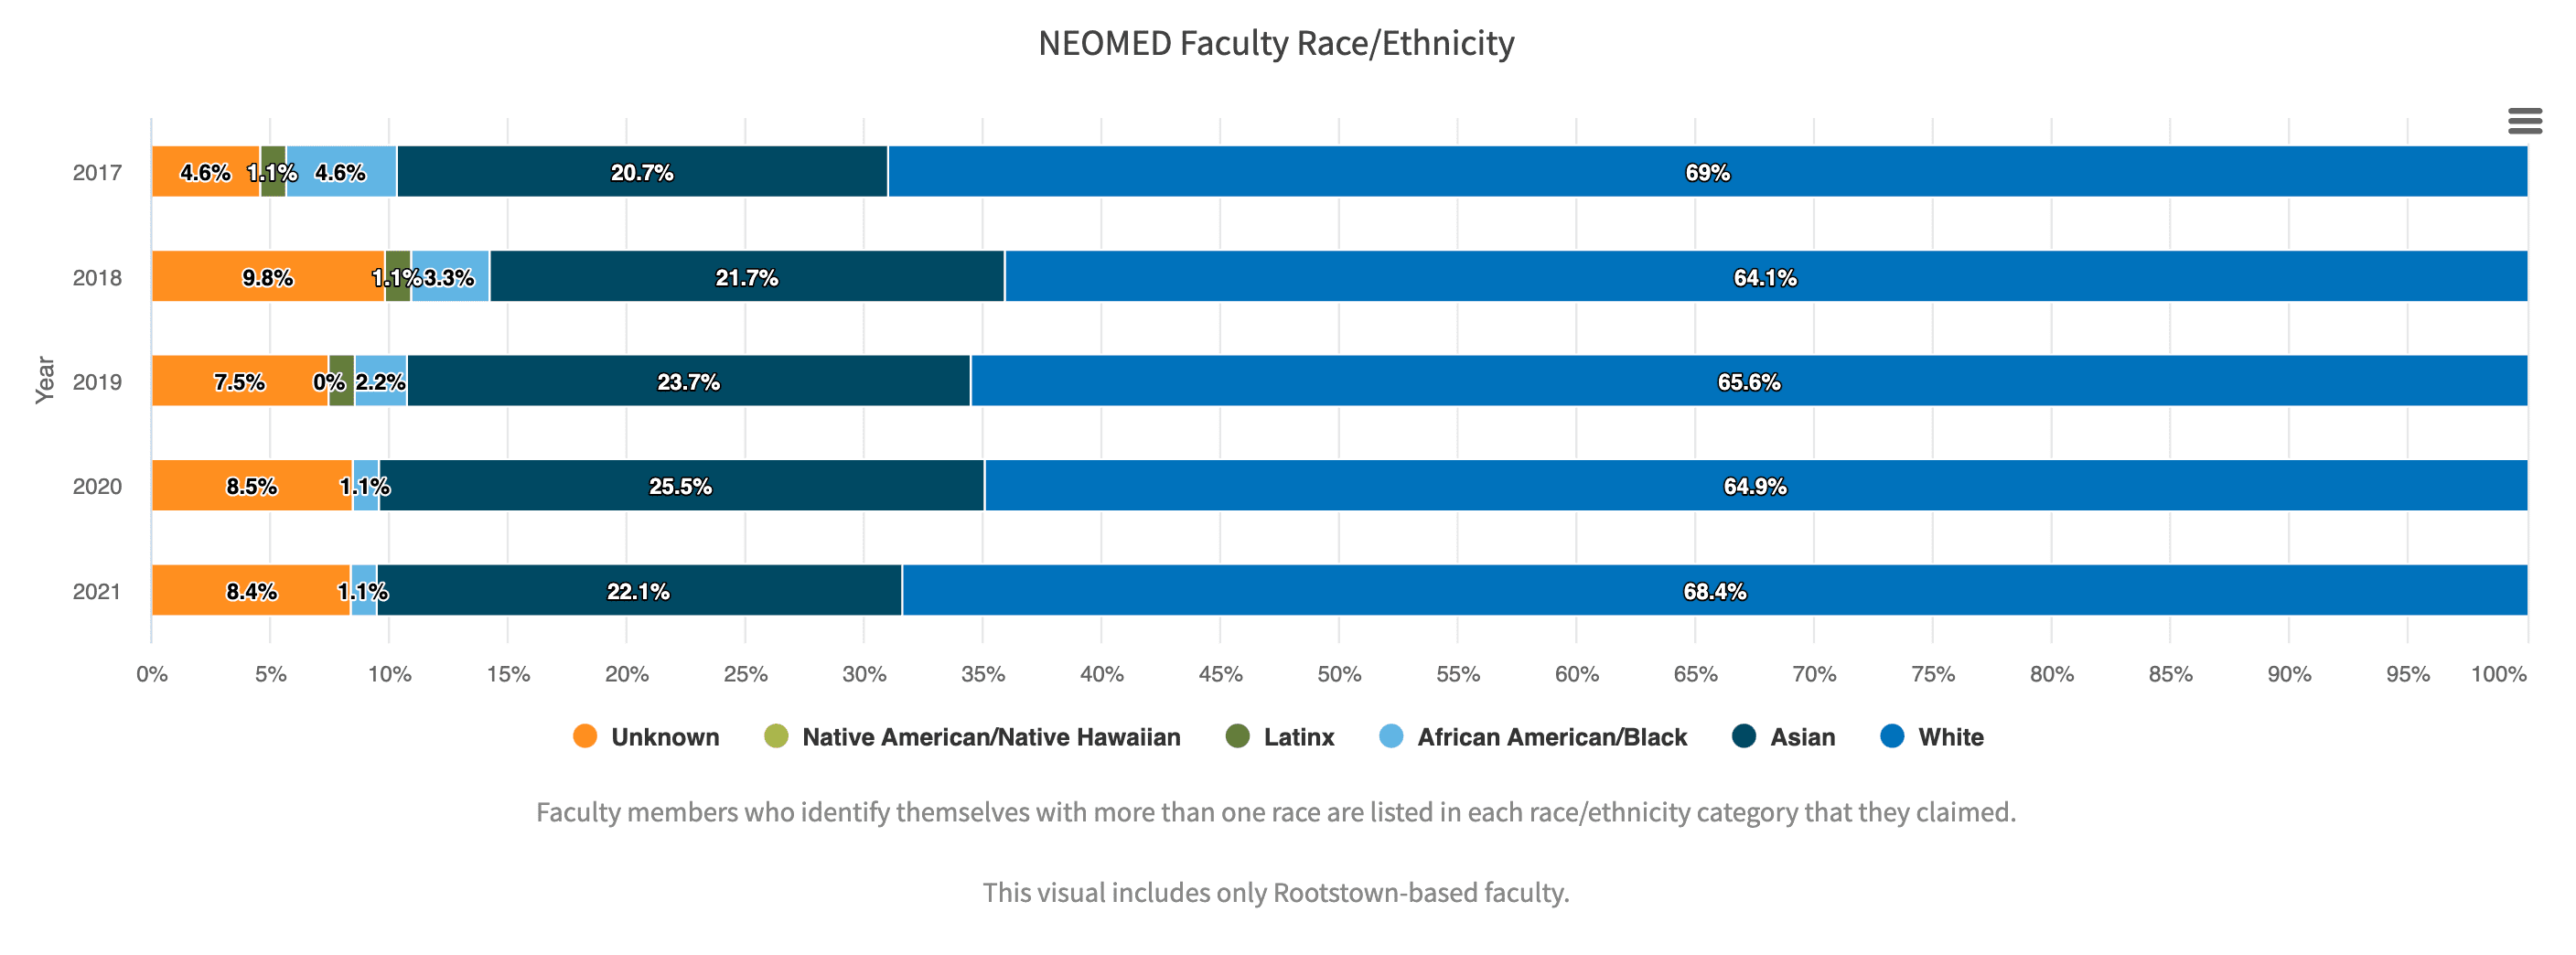 Screenshot of NEOMED's faculty members by race/ethnicity university performance measures chart